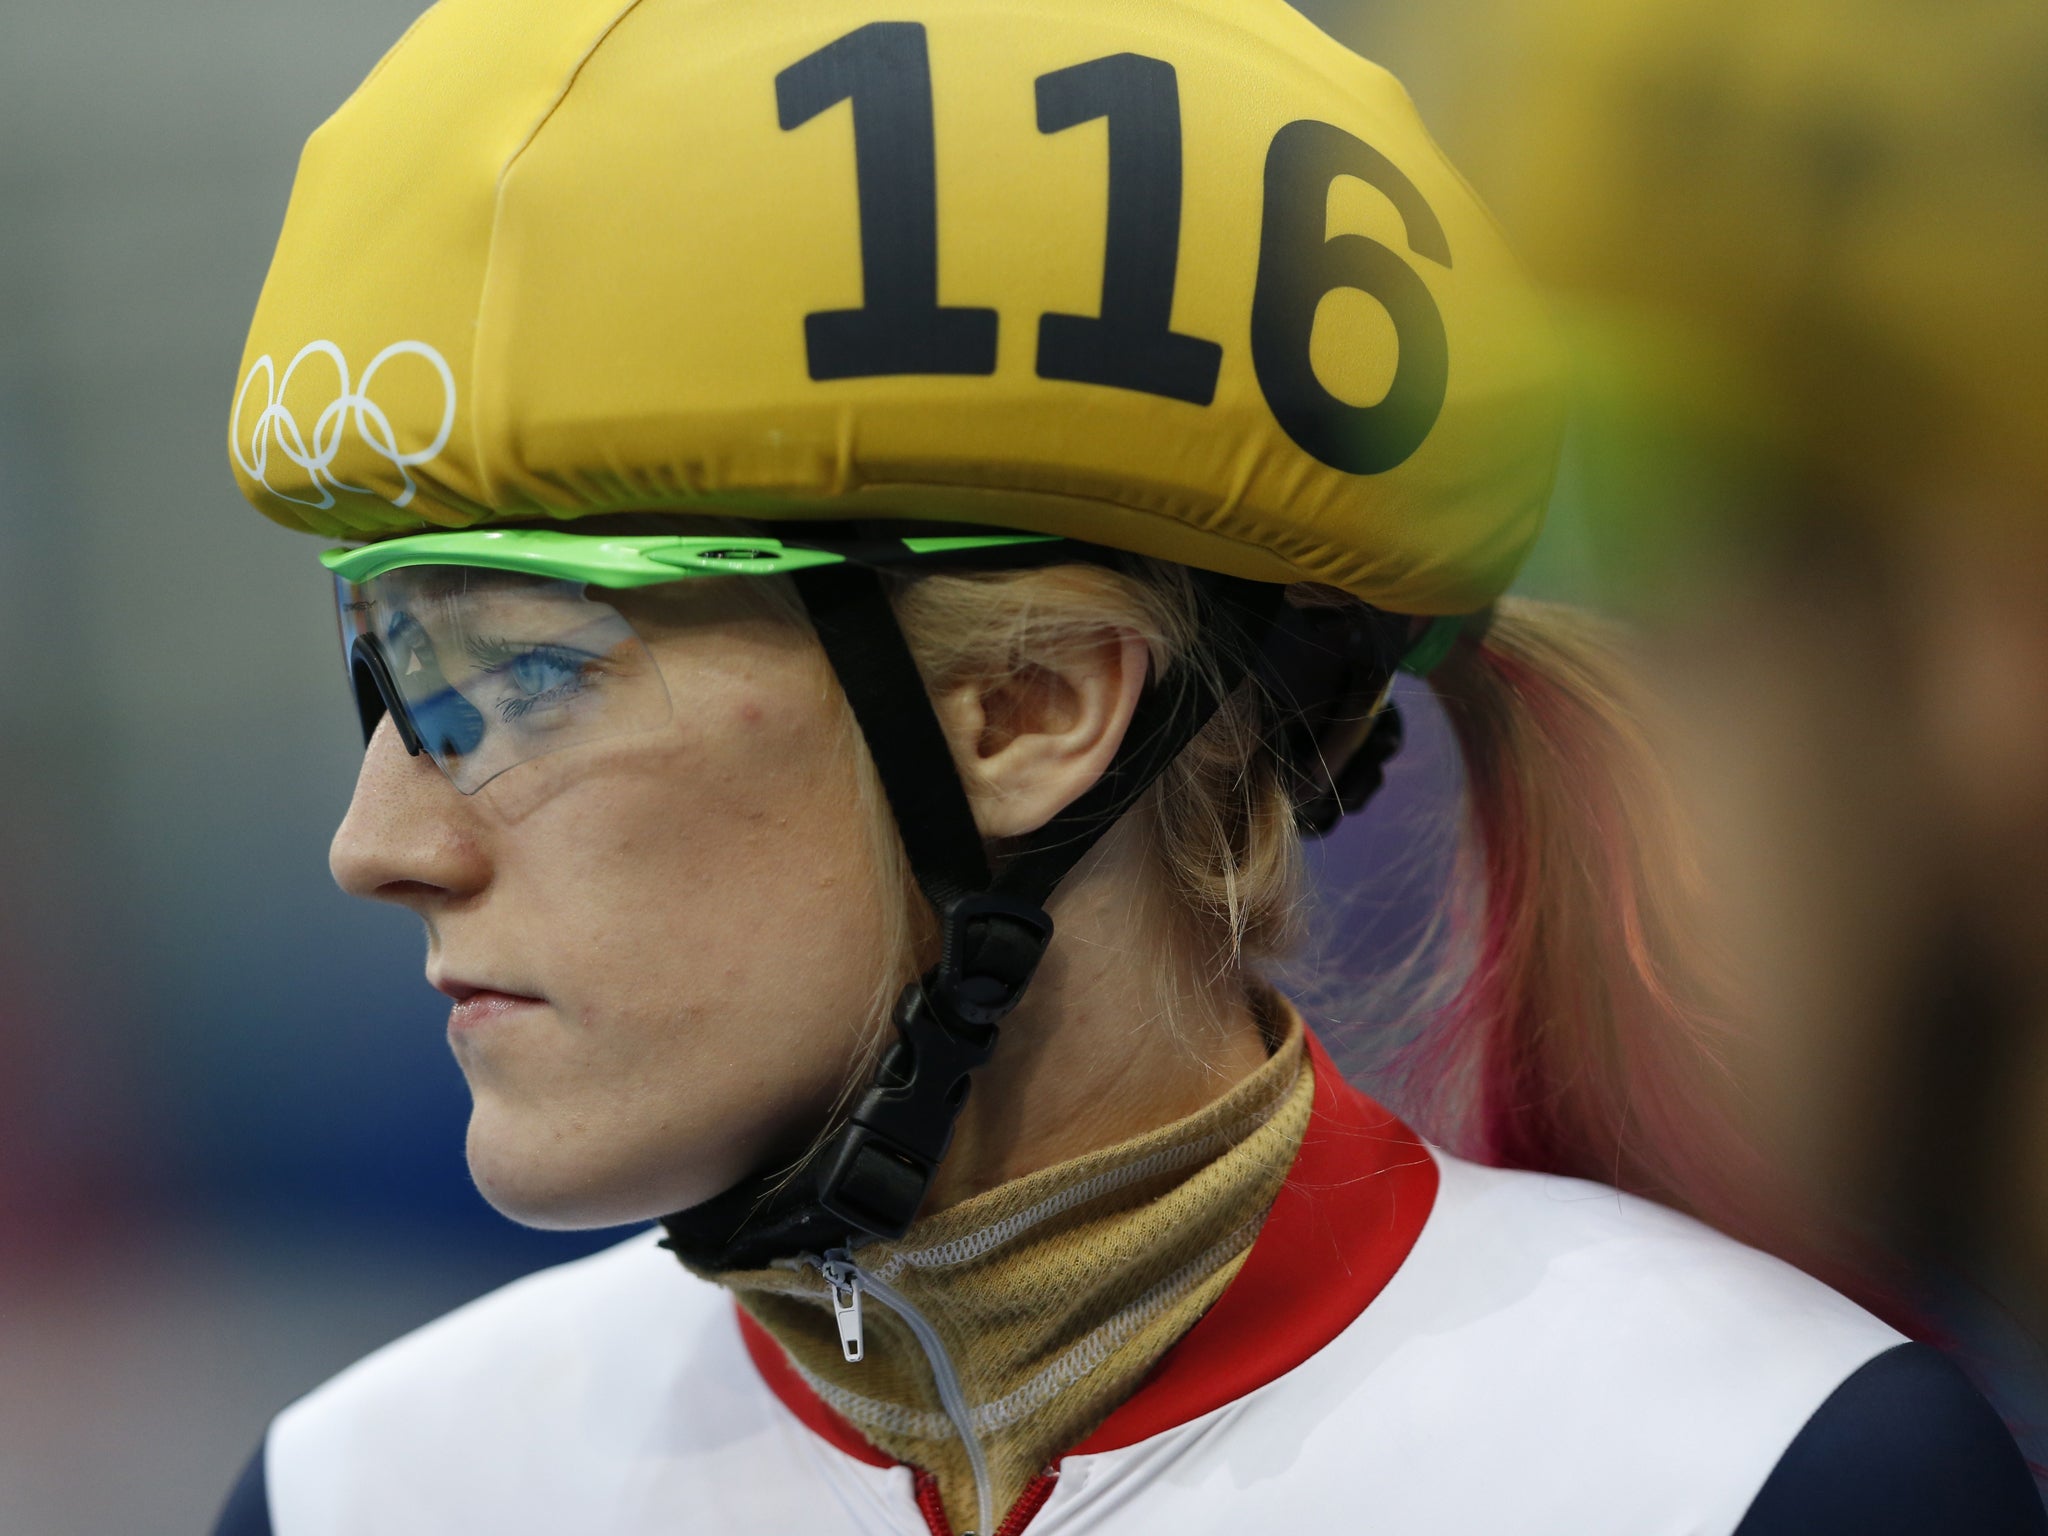 Elise Christie was ruled to have failed to finish in the short track speed skating 1500m on Saturday morning